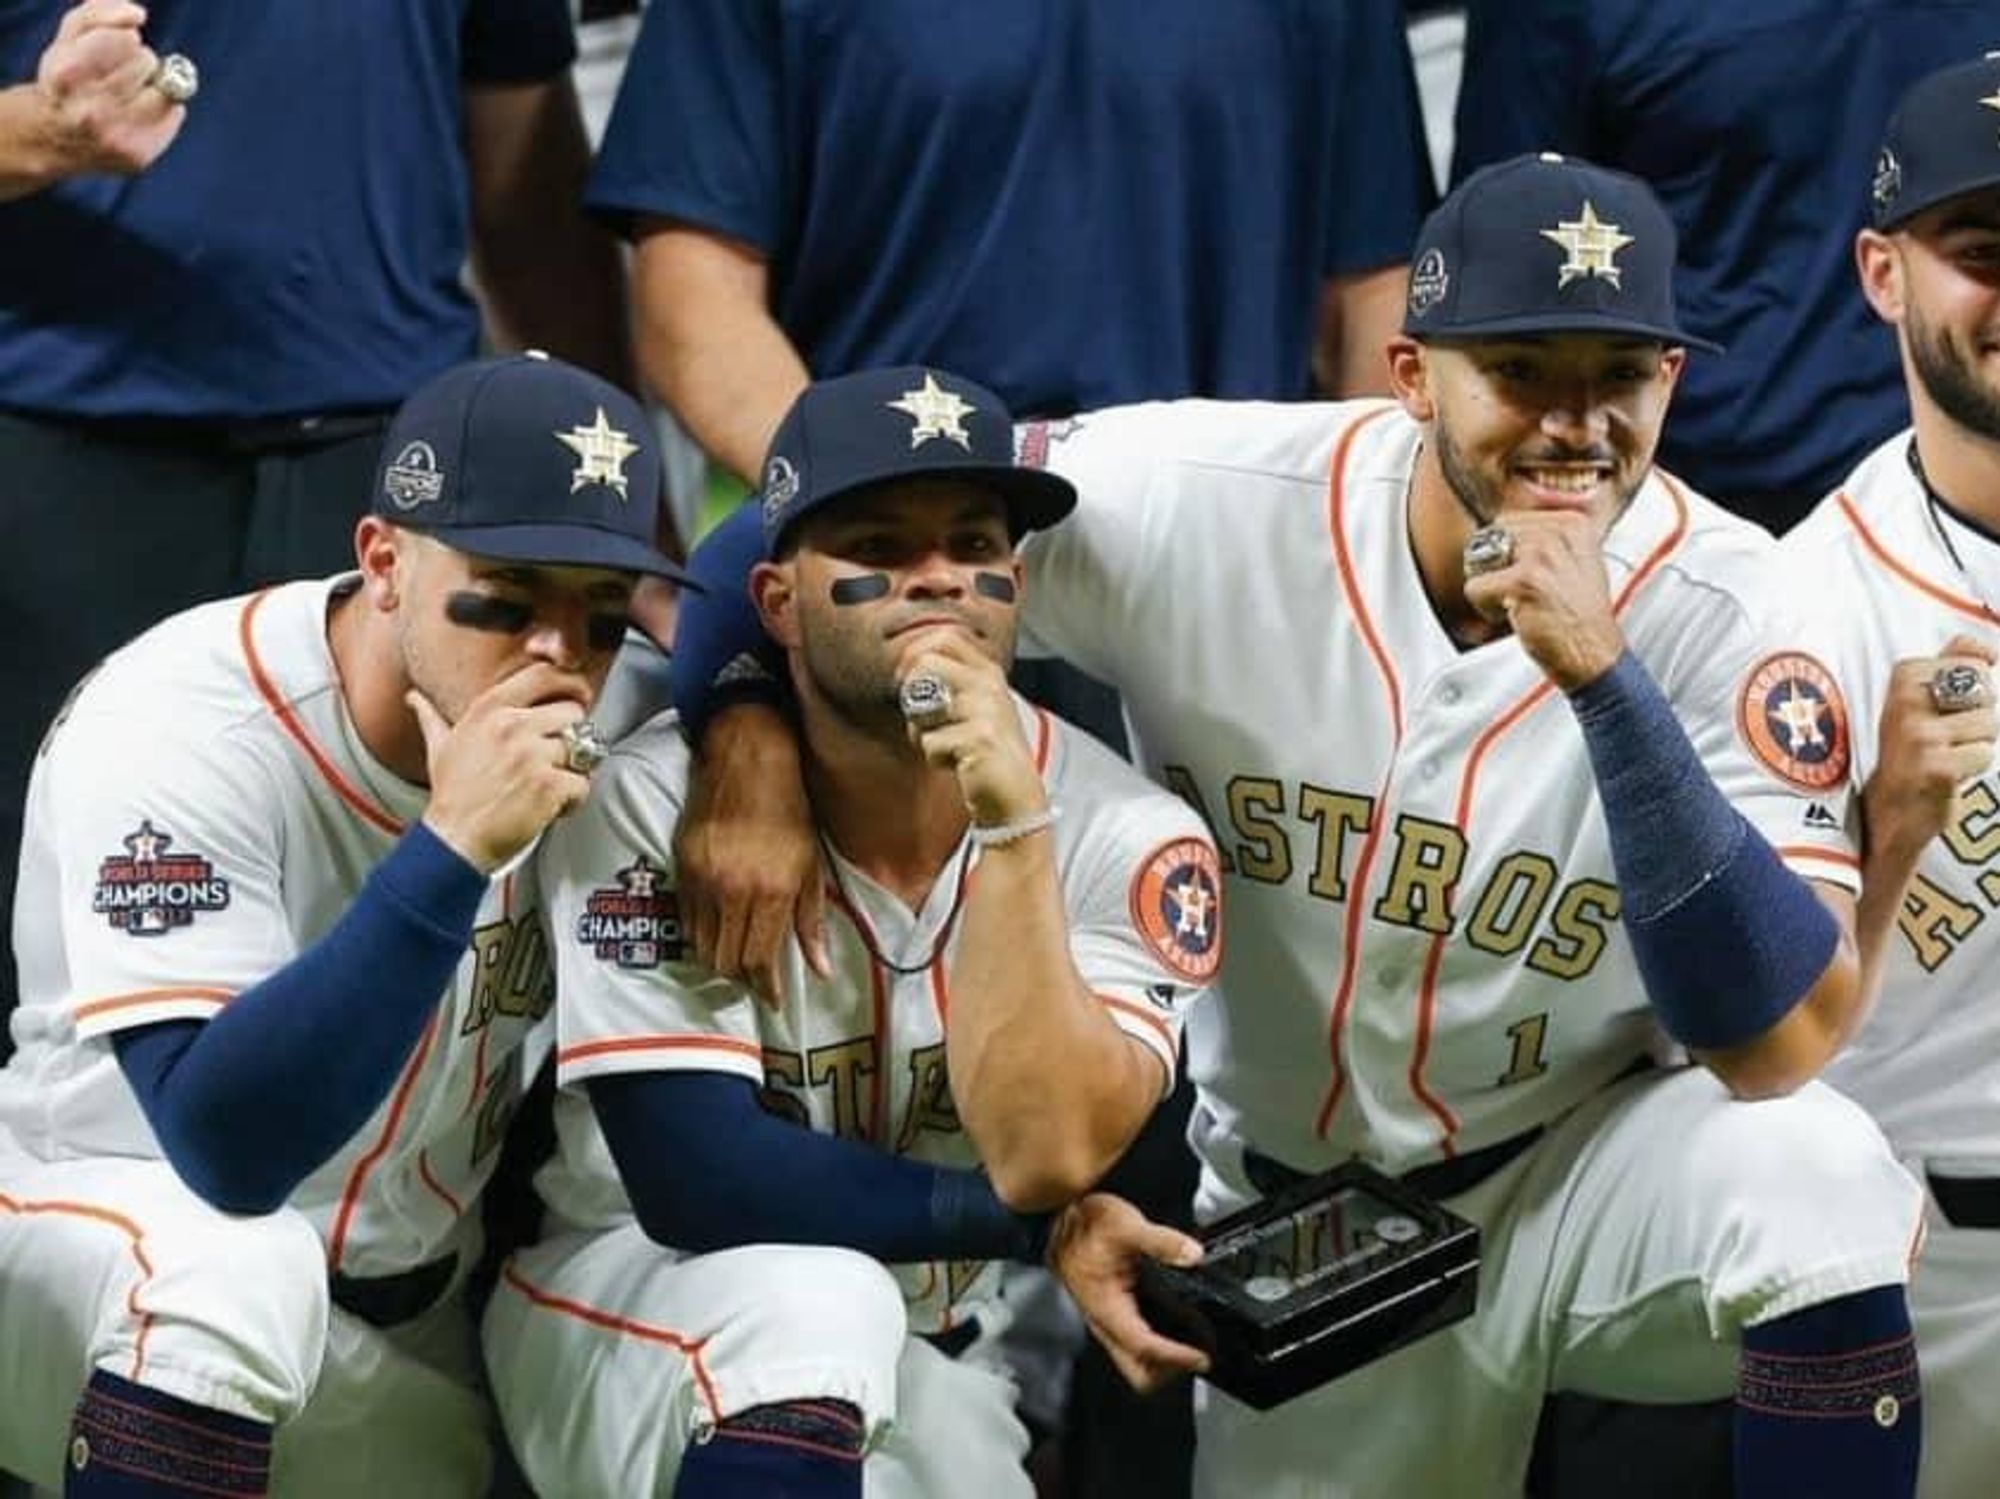 Here is why Astros fans should cherish our 2017 World Series win now more  than ever - CultureMap Houston